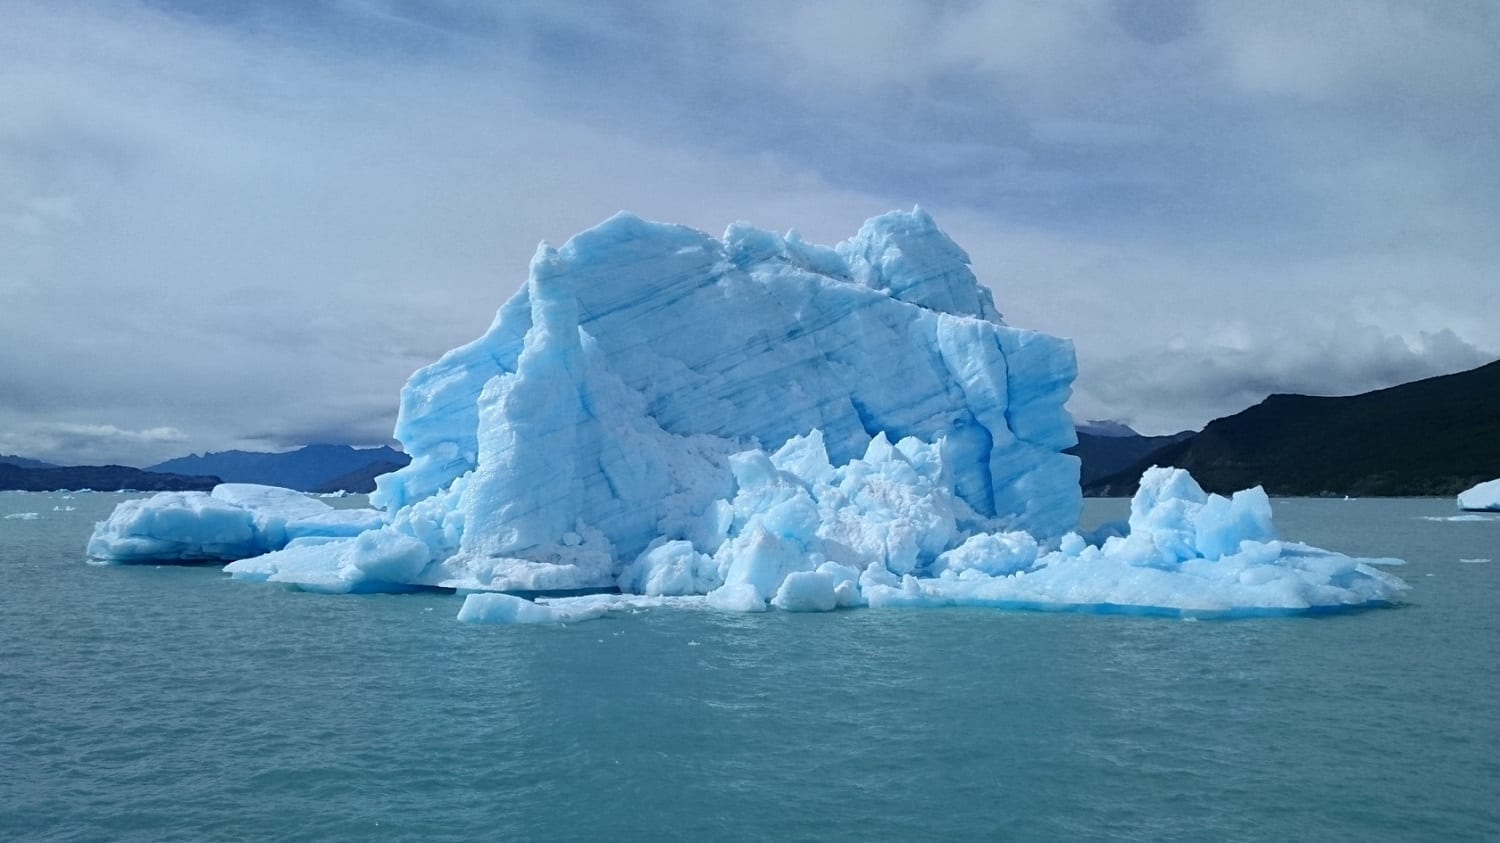 Blue-tinged iceberg with mountains in backdrop, photo credit: Pxhere